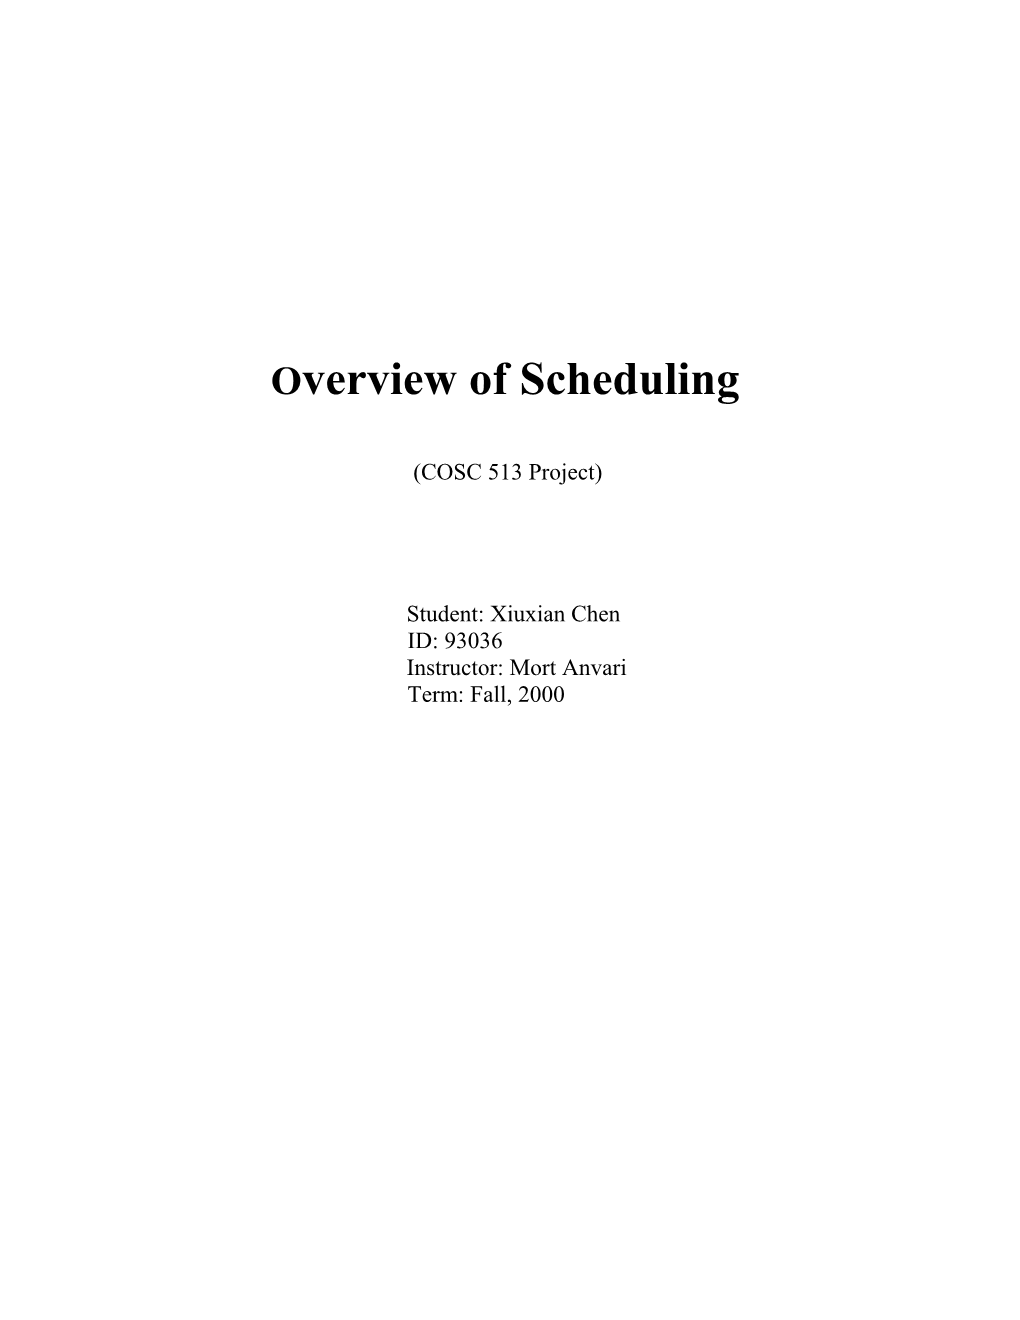 Overview of Scheduling